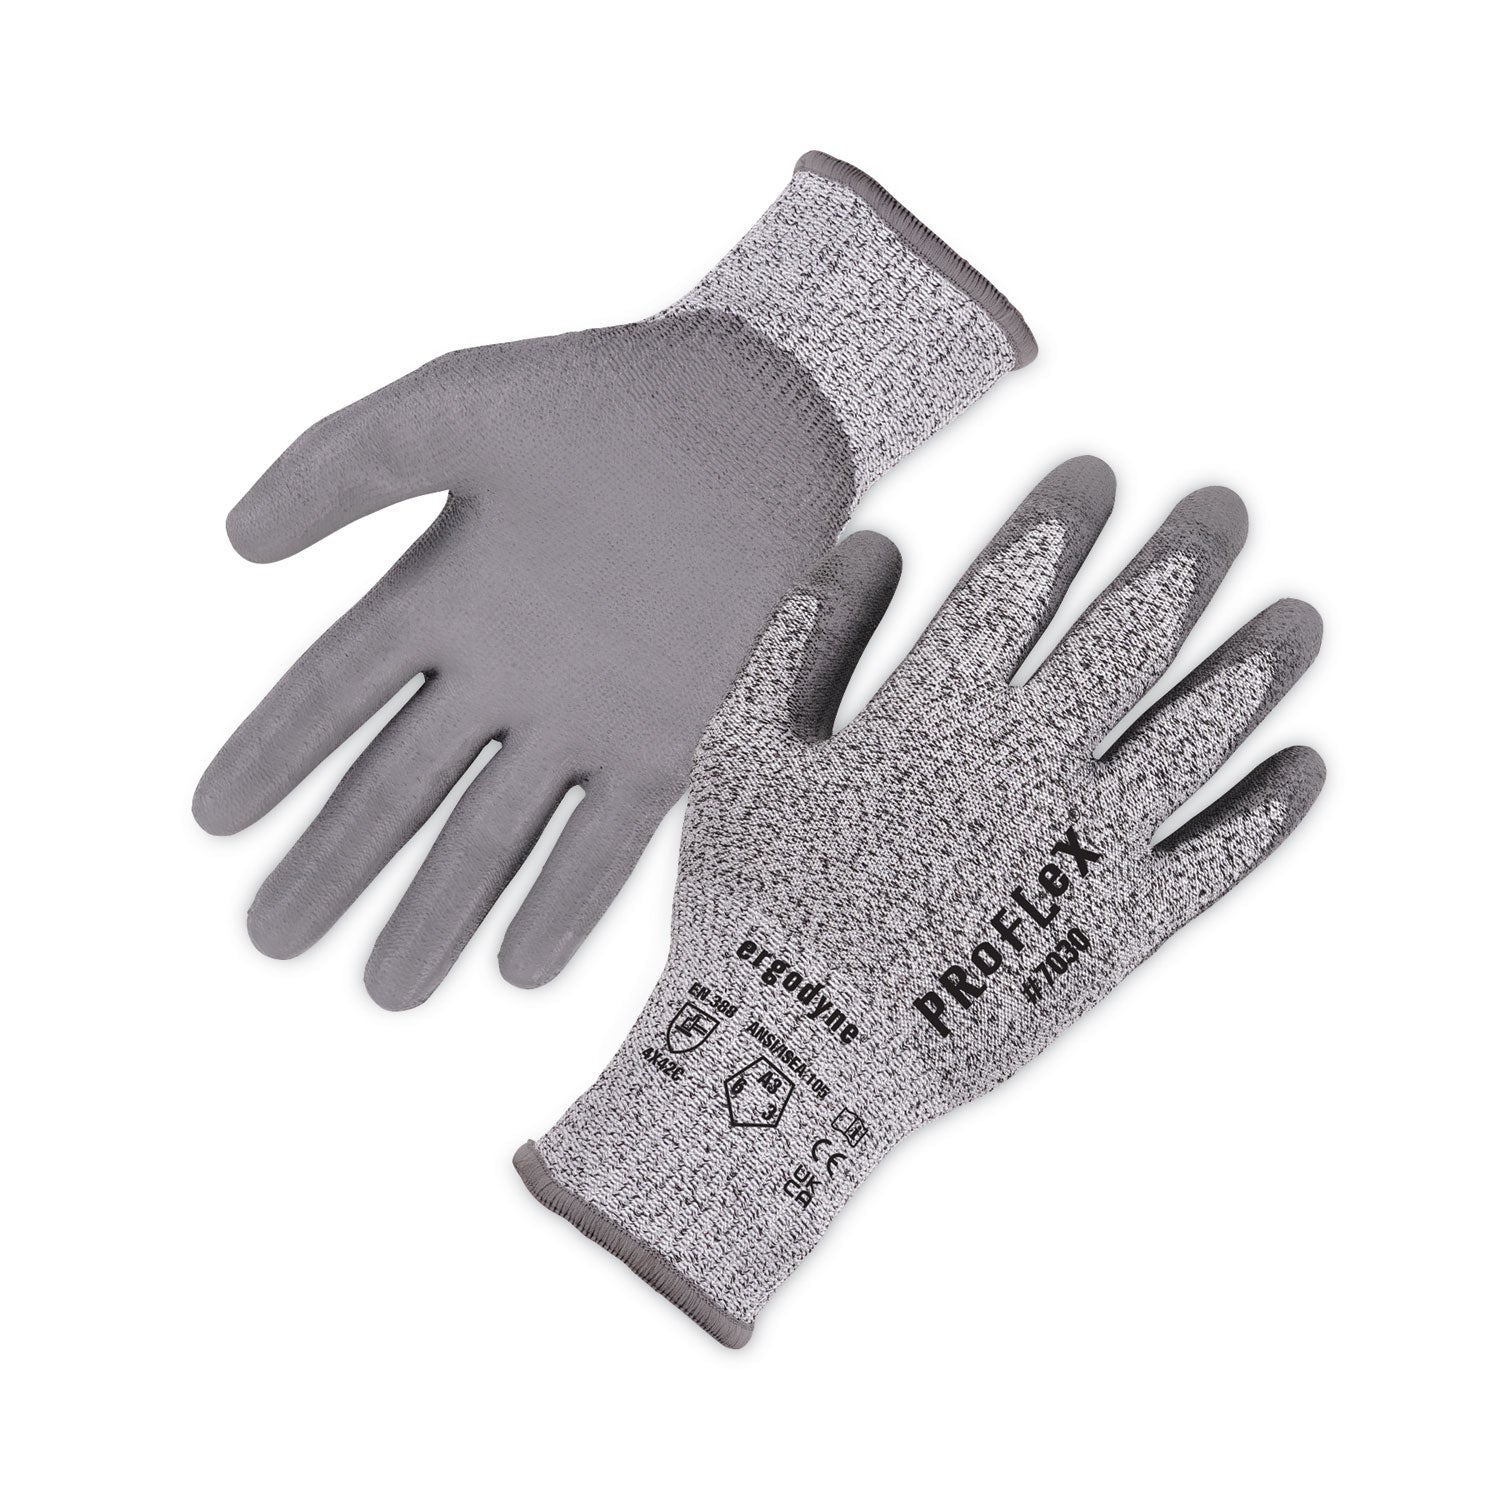 proflex-7030-ansi-a3-pu-coated-cr-gloves-gray-small-pair-ships-in-1-3-business-days_ego10462 - 1